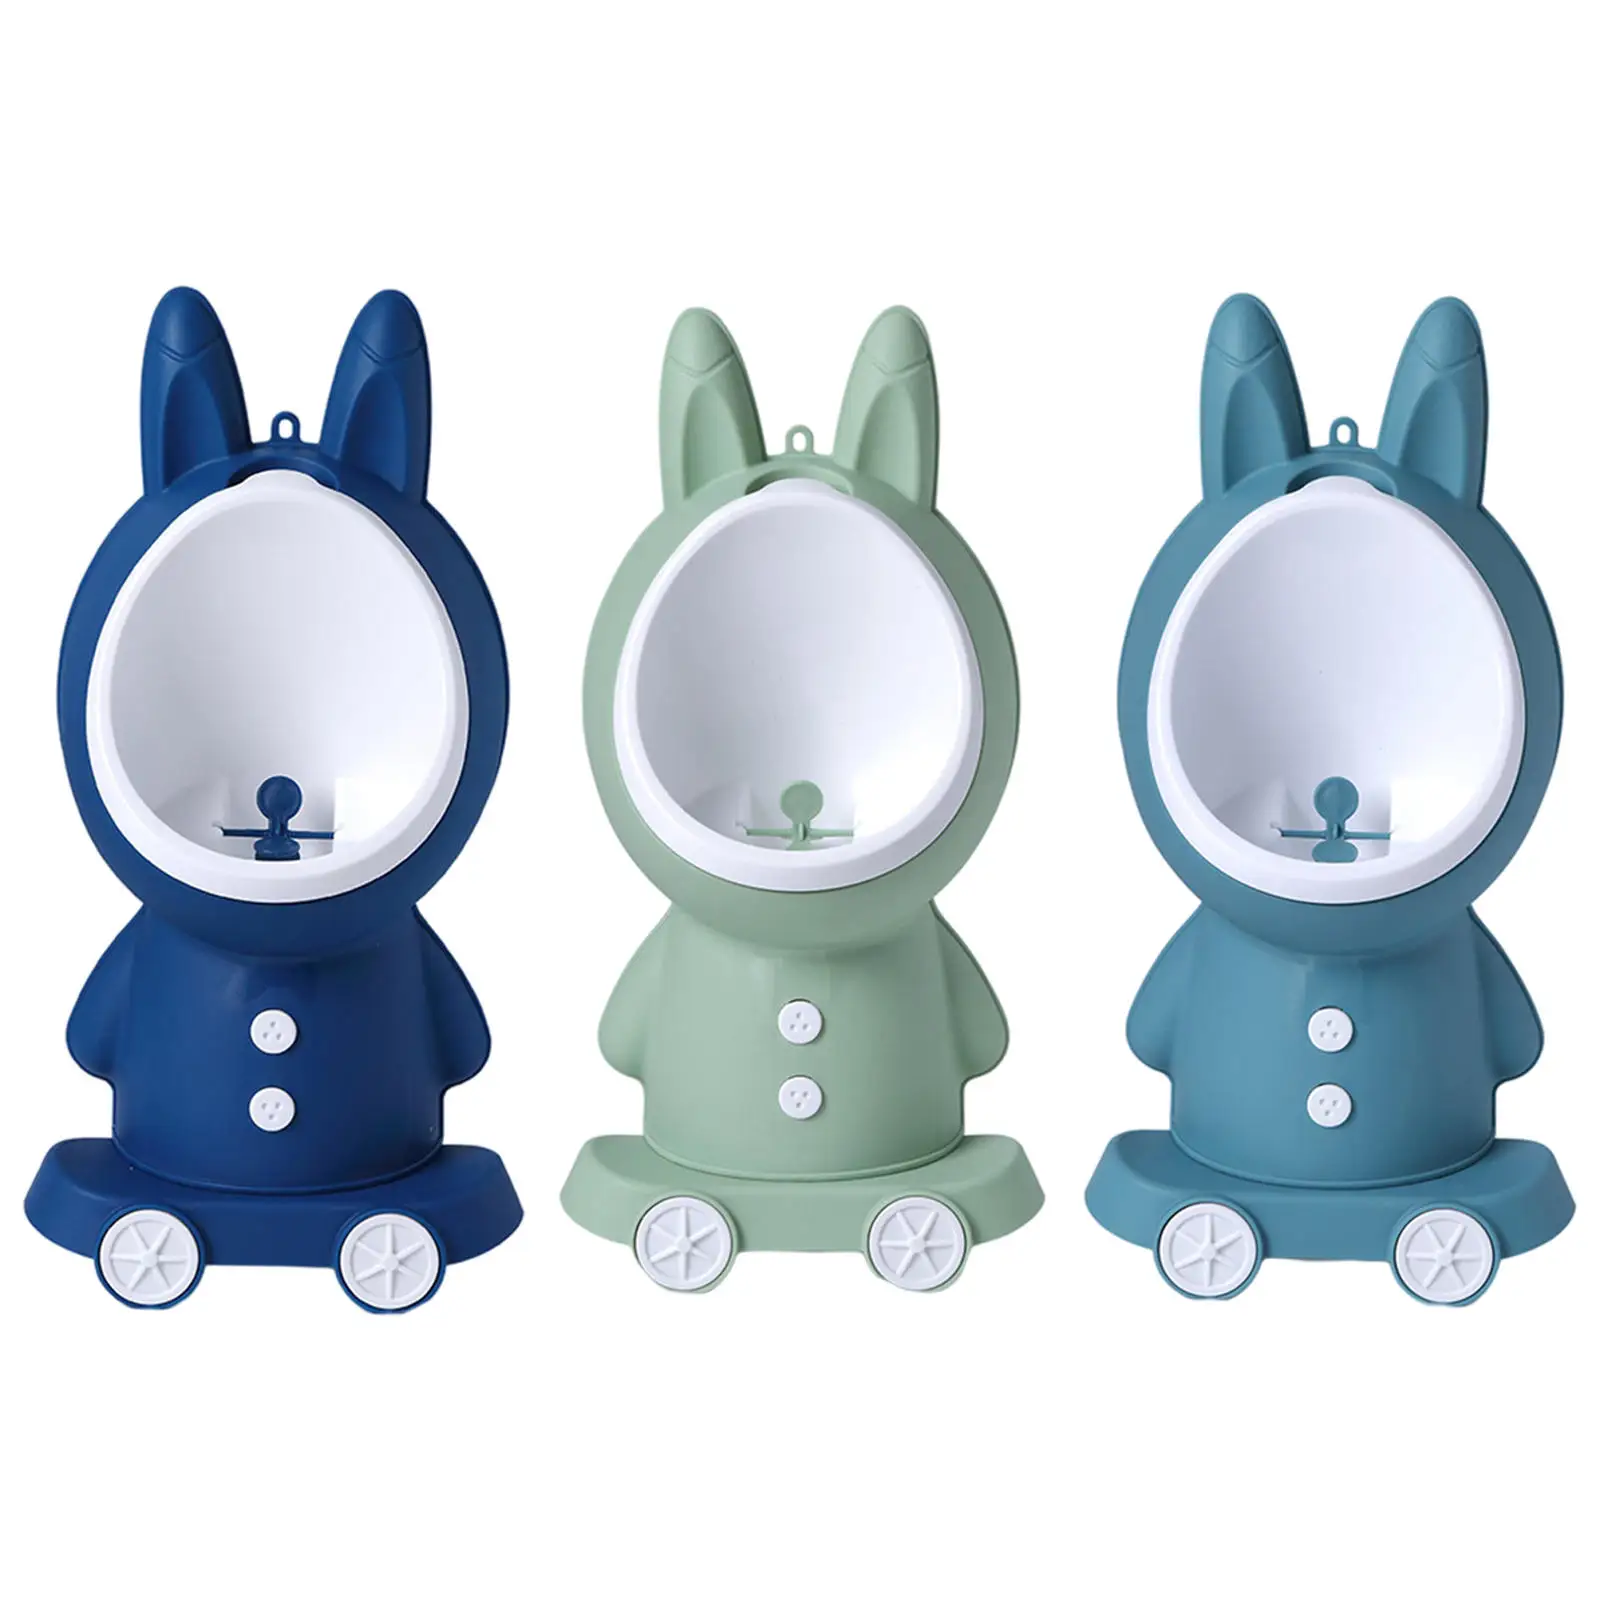 Portable RabbitPee Toilet Kids Children Standing Potty Urinal Wall Mounted Kids Baby Removable Bowl Insert